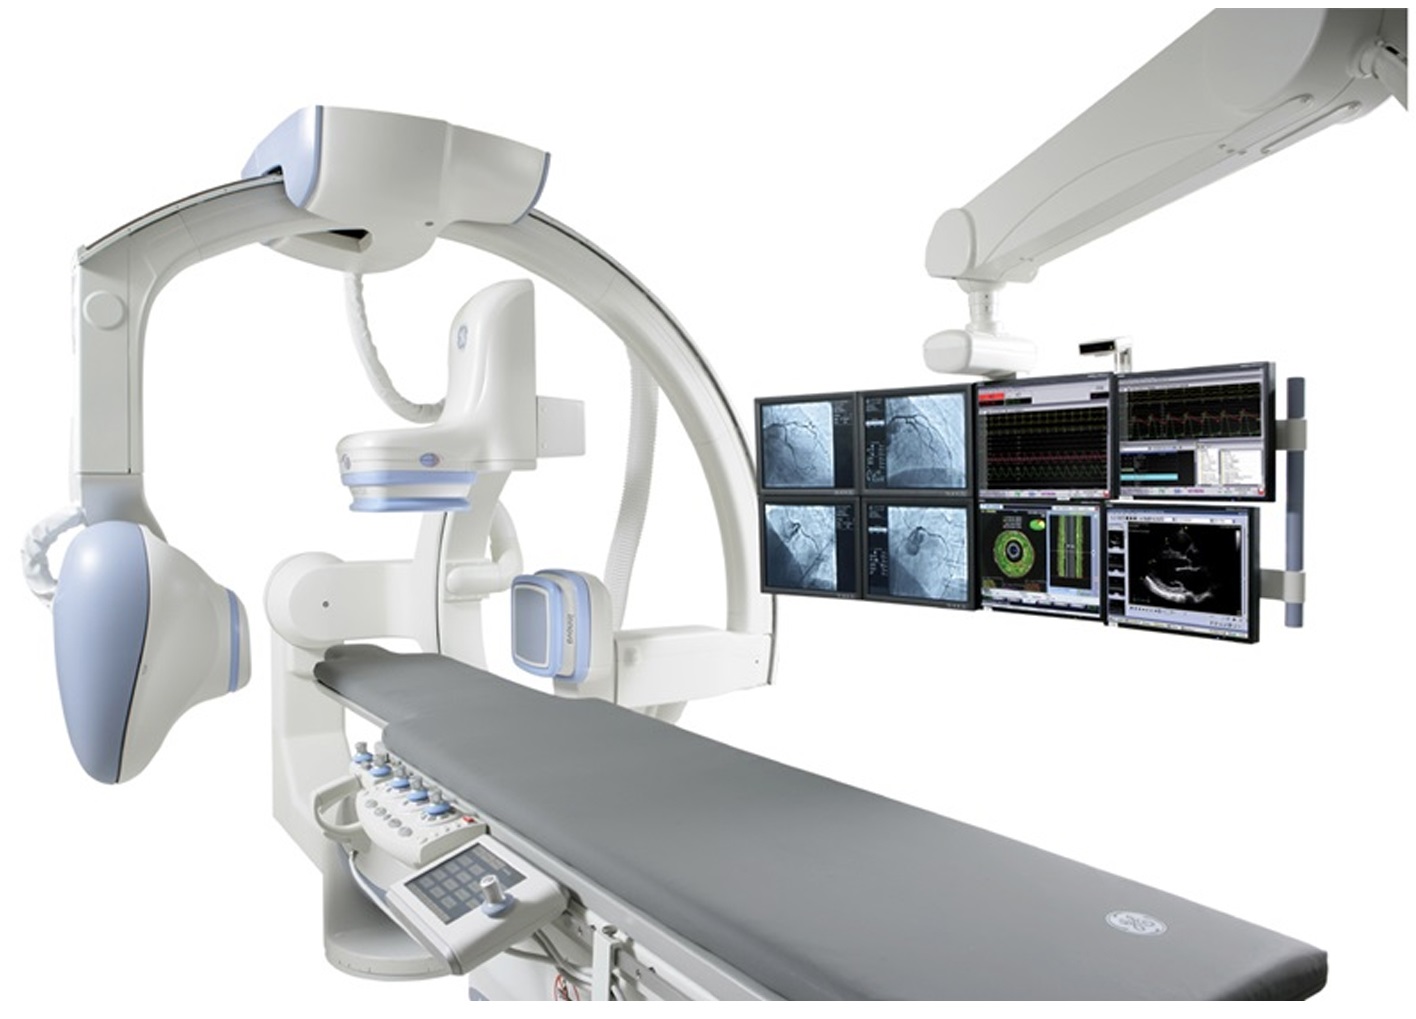 Image of high-end medical imaging device